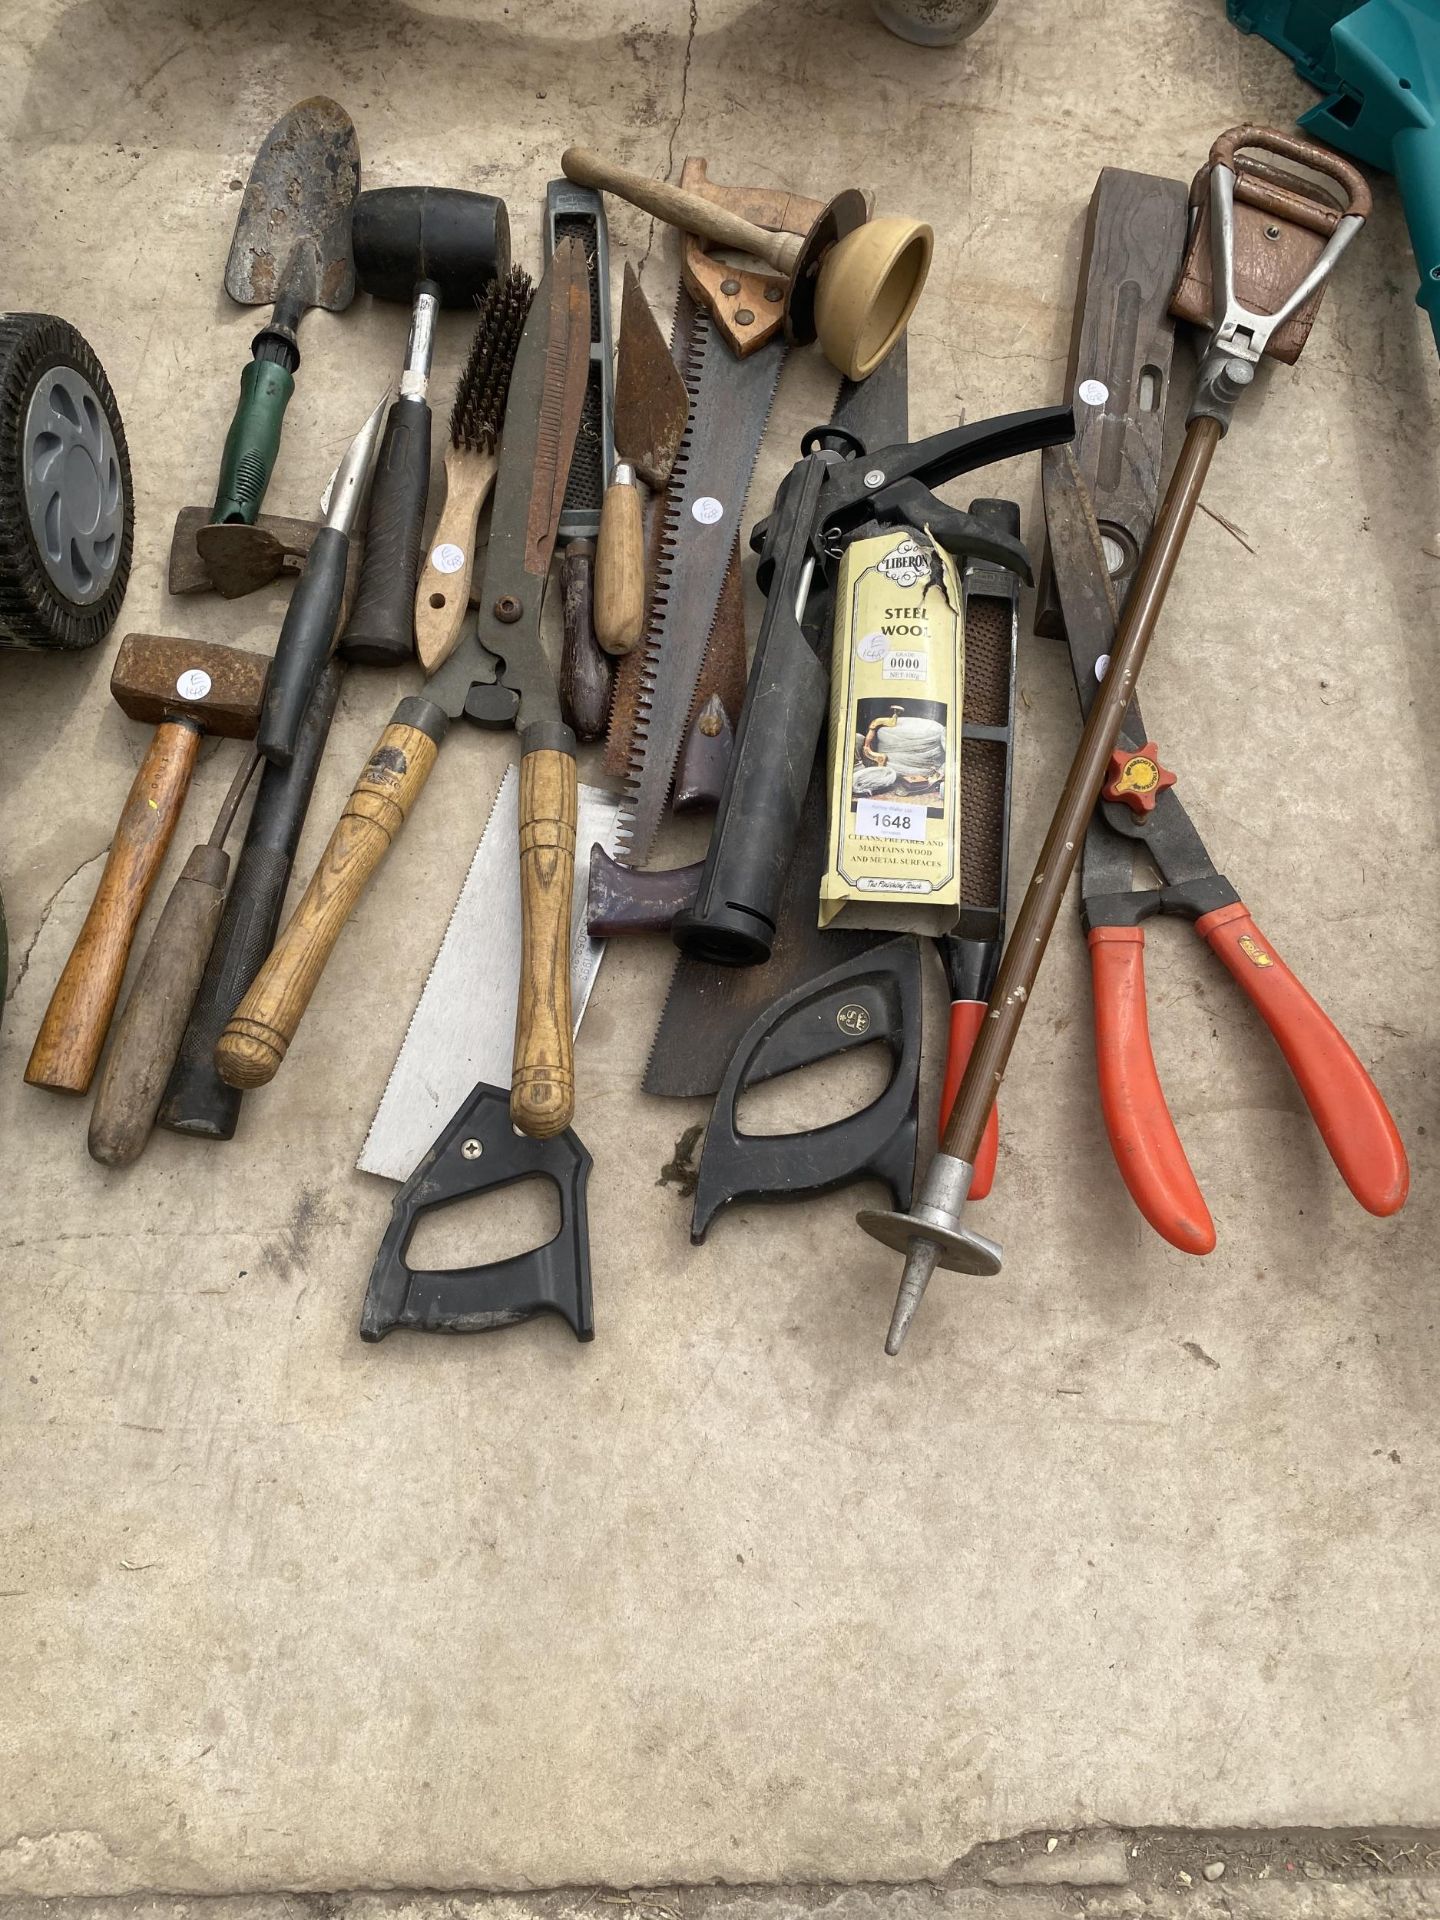 AN ASSORTMENT OF TOOLS TO INCLUDE HAMMERS, SAWS AND A STICK SEAT ETC